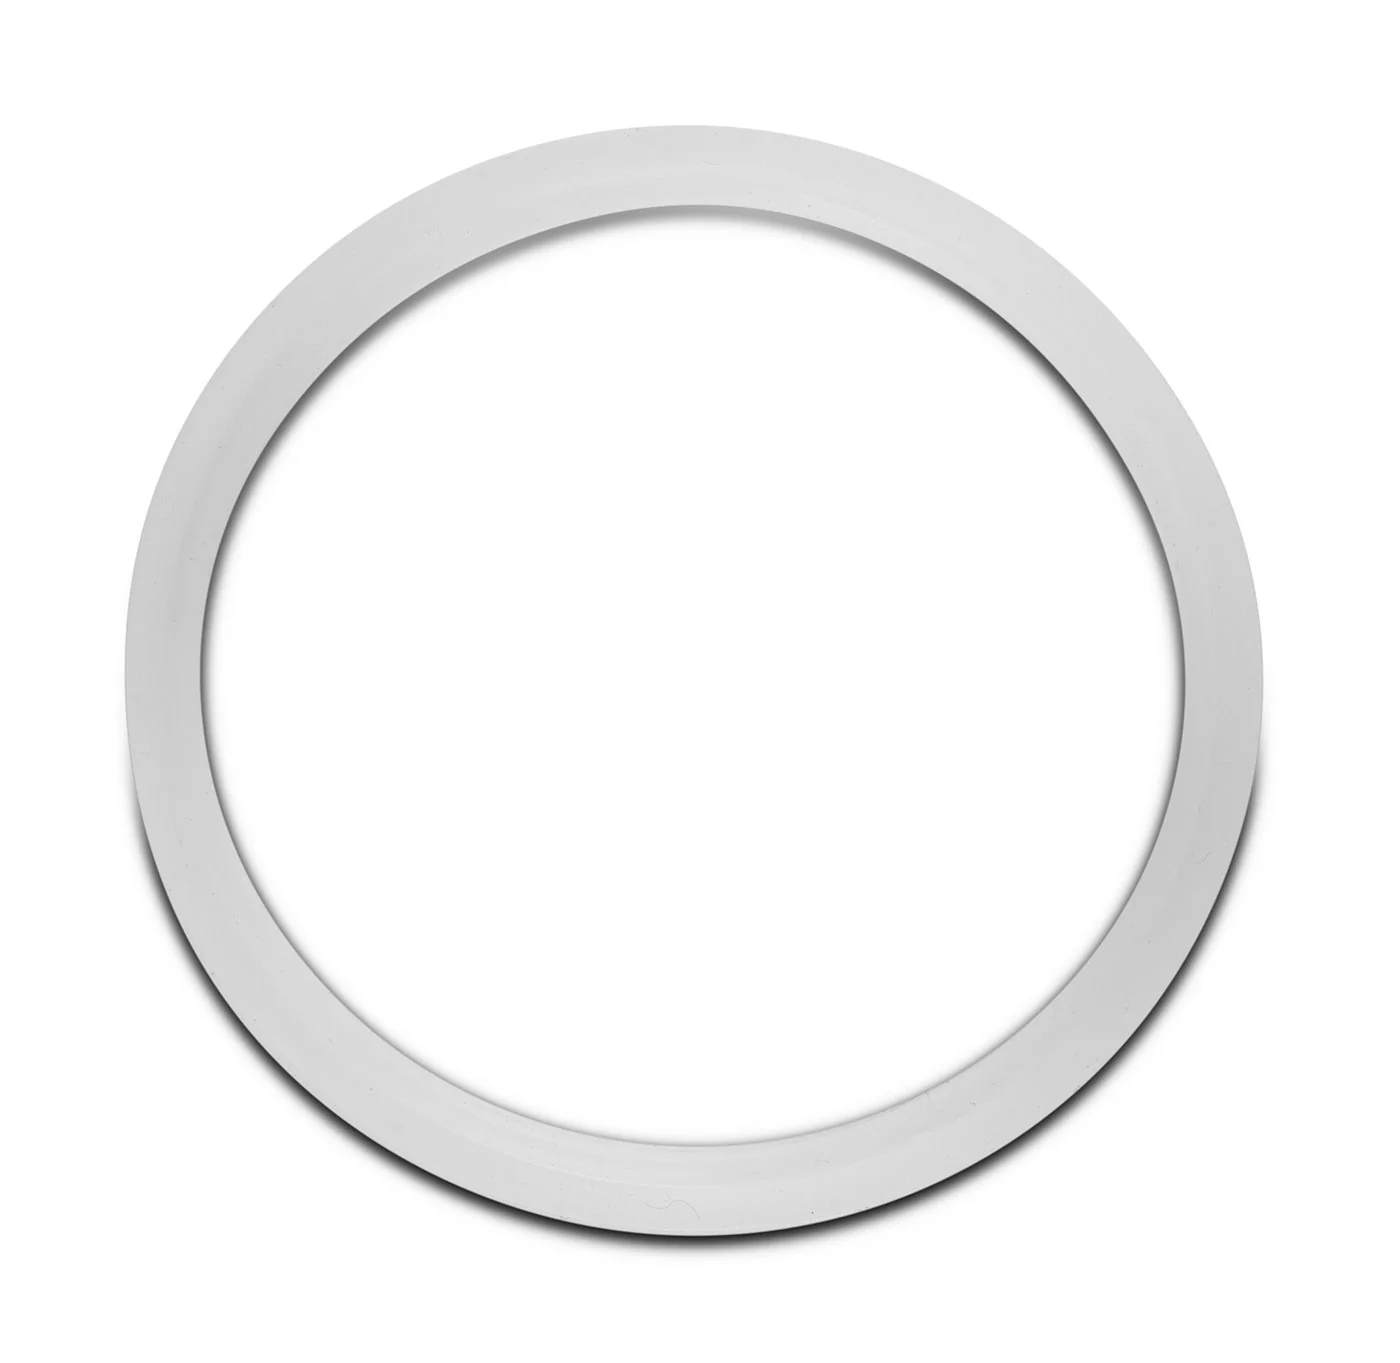 Replacement Gasket for Dutch Weave Sintered Filter Disks - Silicone Questions & Answers